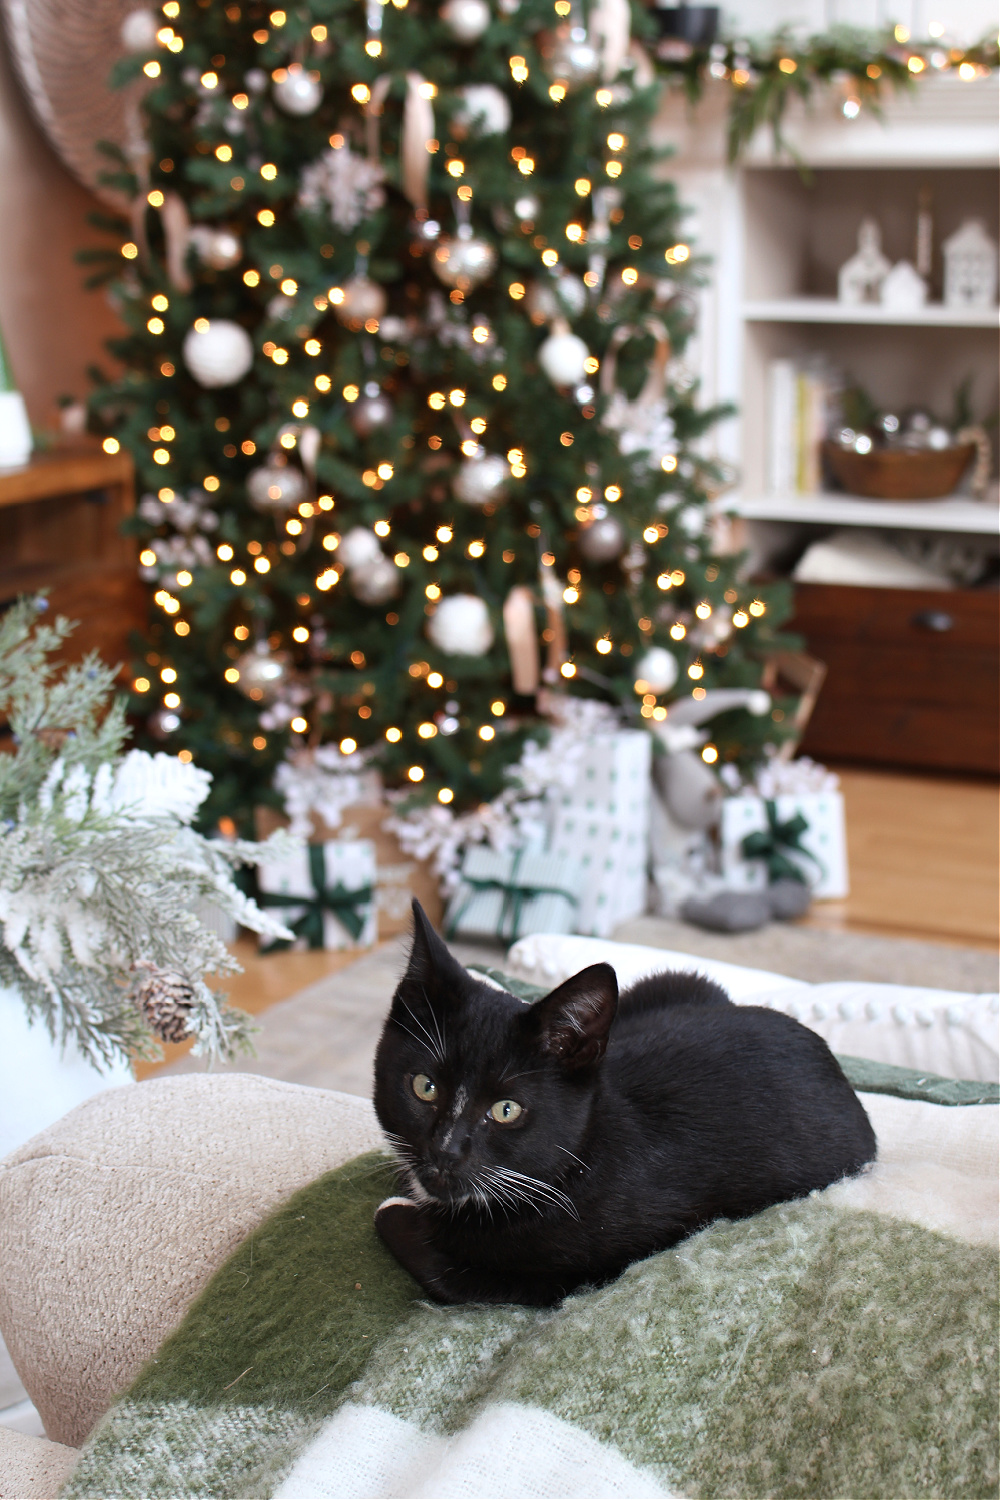 Black cat sleeping on a sofa in a Christmas living room.